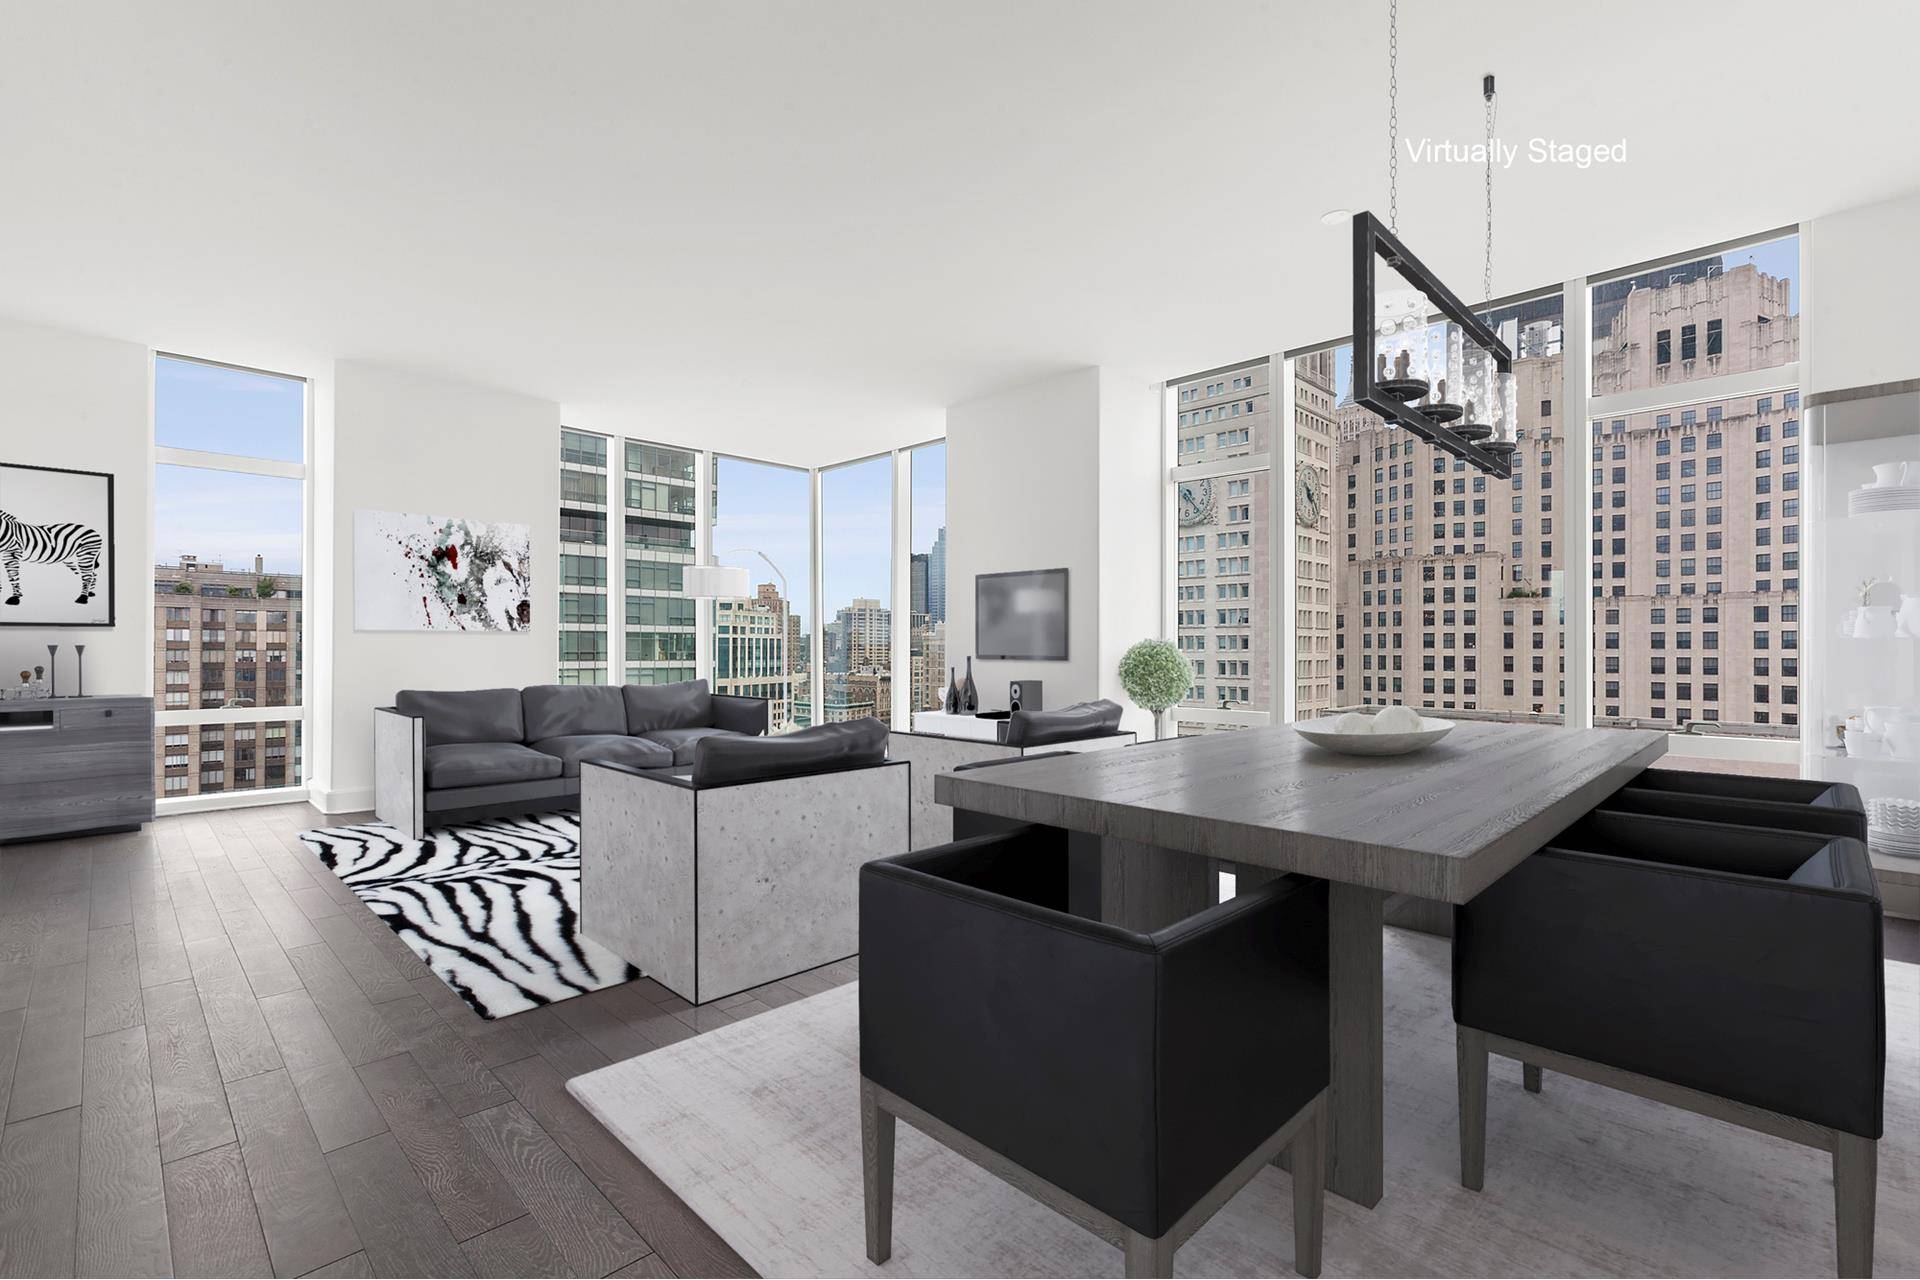 Welcome to 28A, an astonishing two bedroom corner residence surrounded by floor to ceiling windows showcasing stunning views of the Midtown and Downtown skyline.